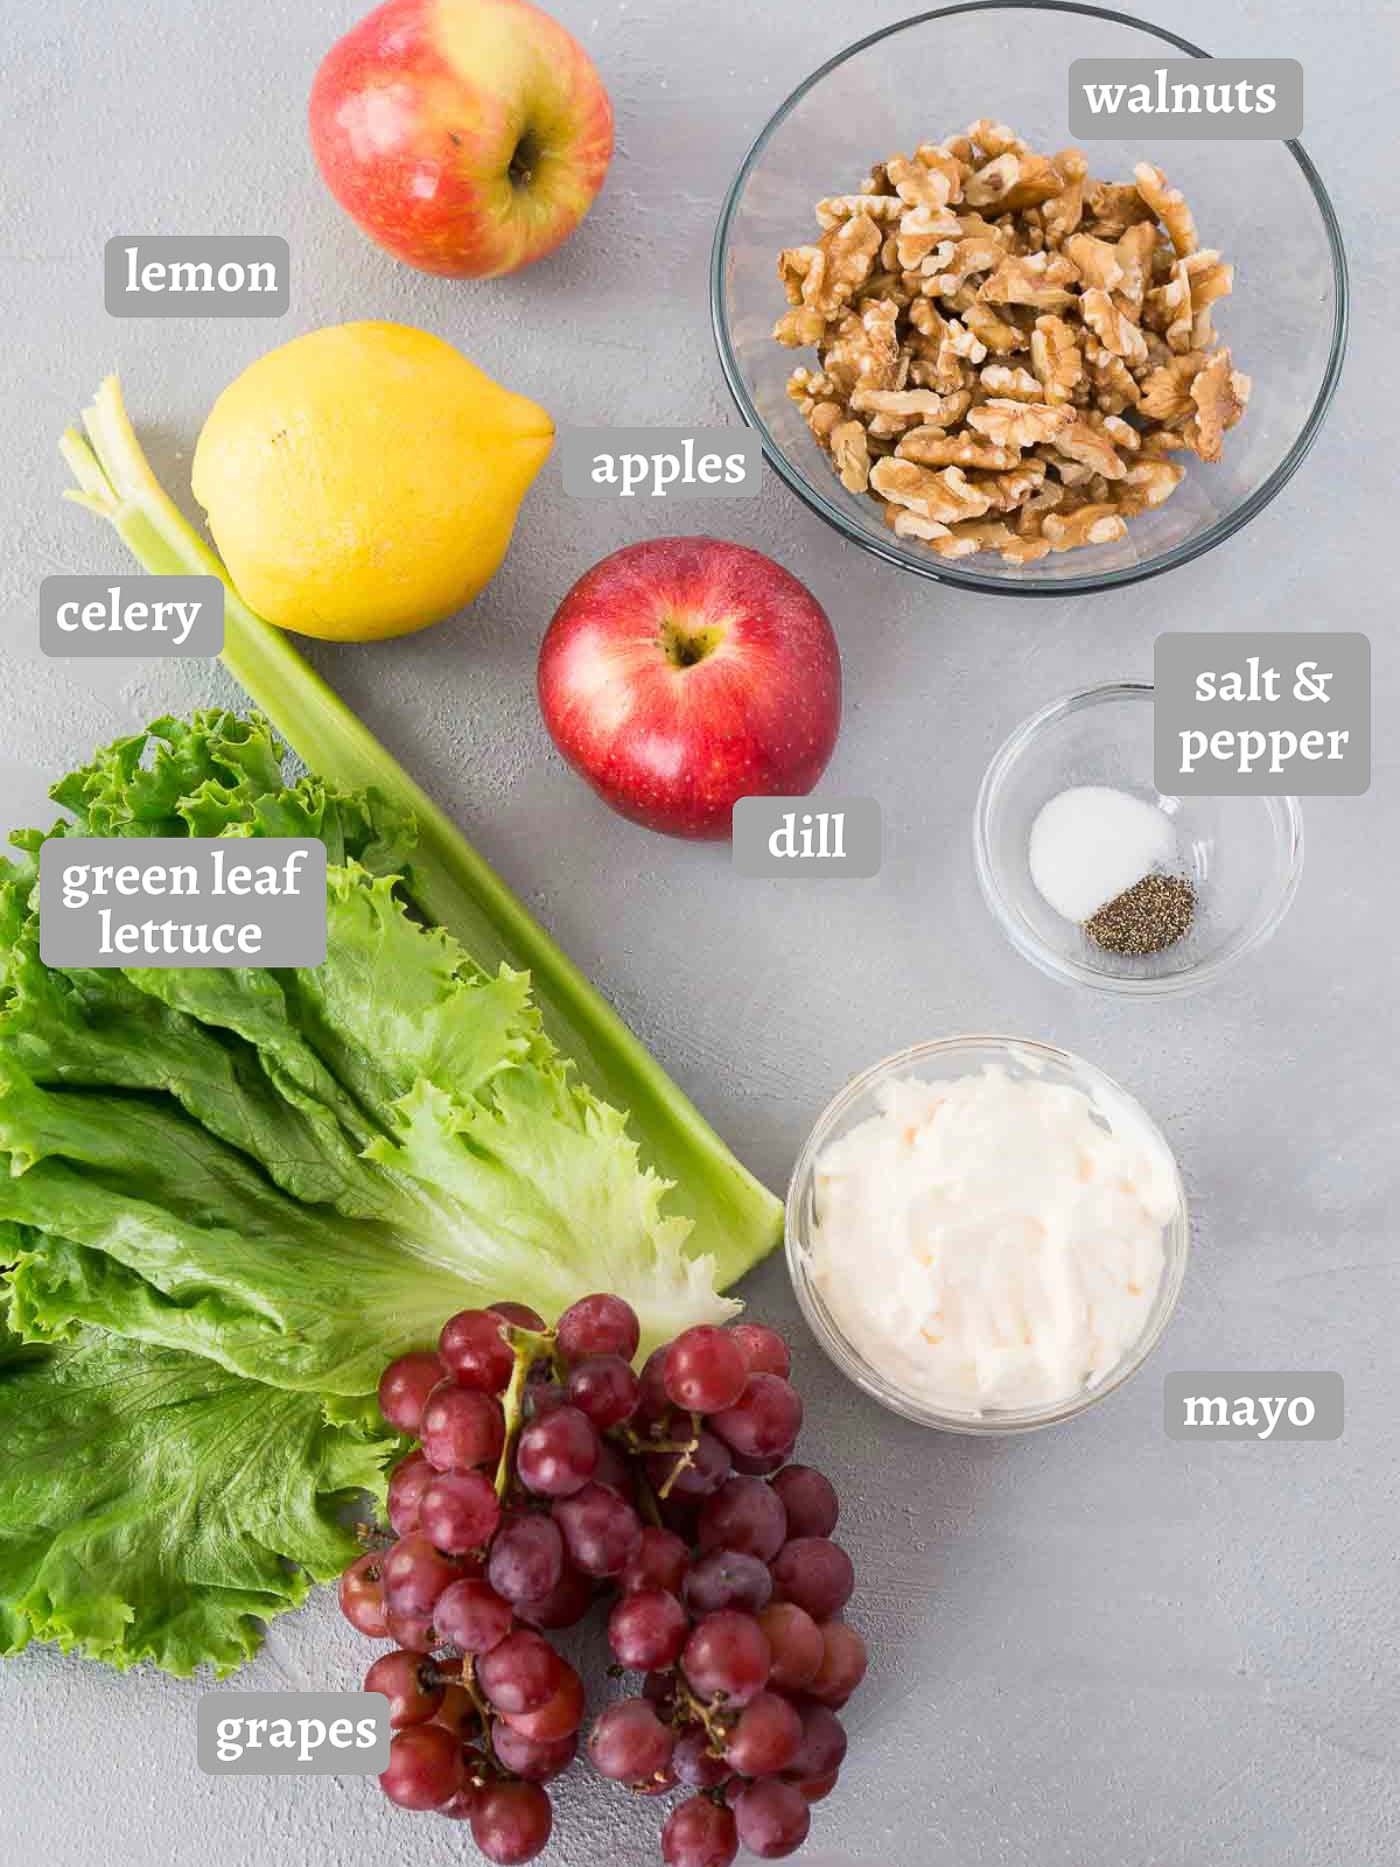 the ingredients you need for waldorf salad